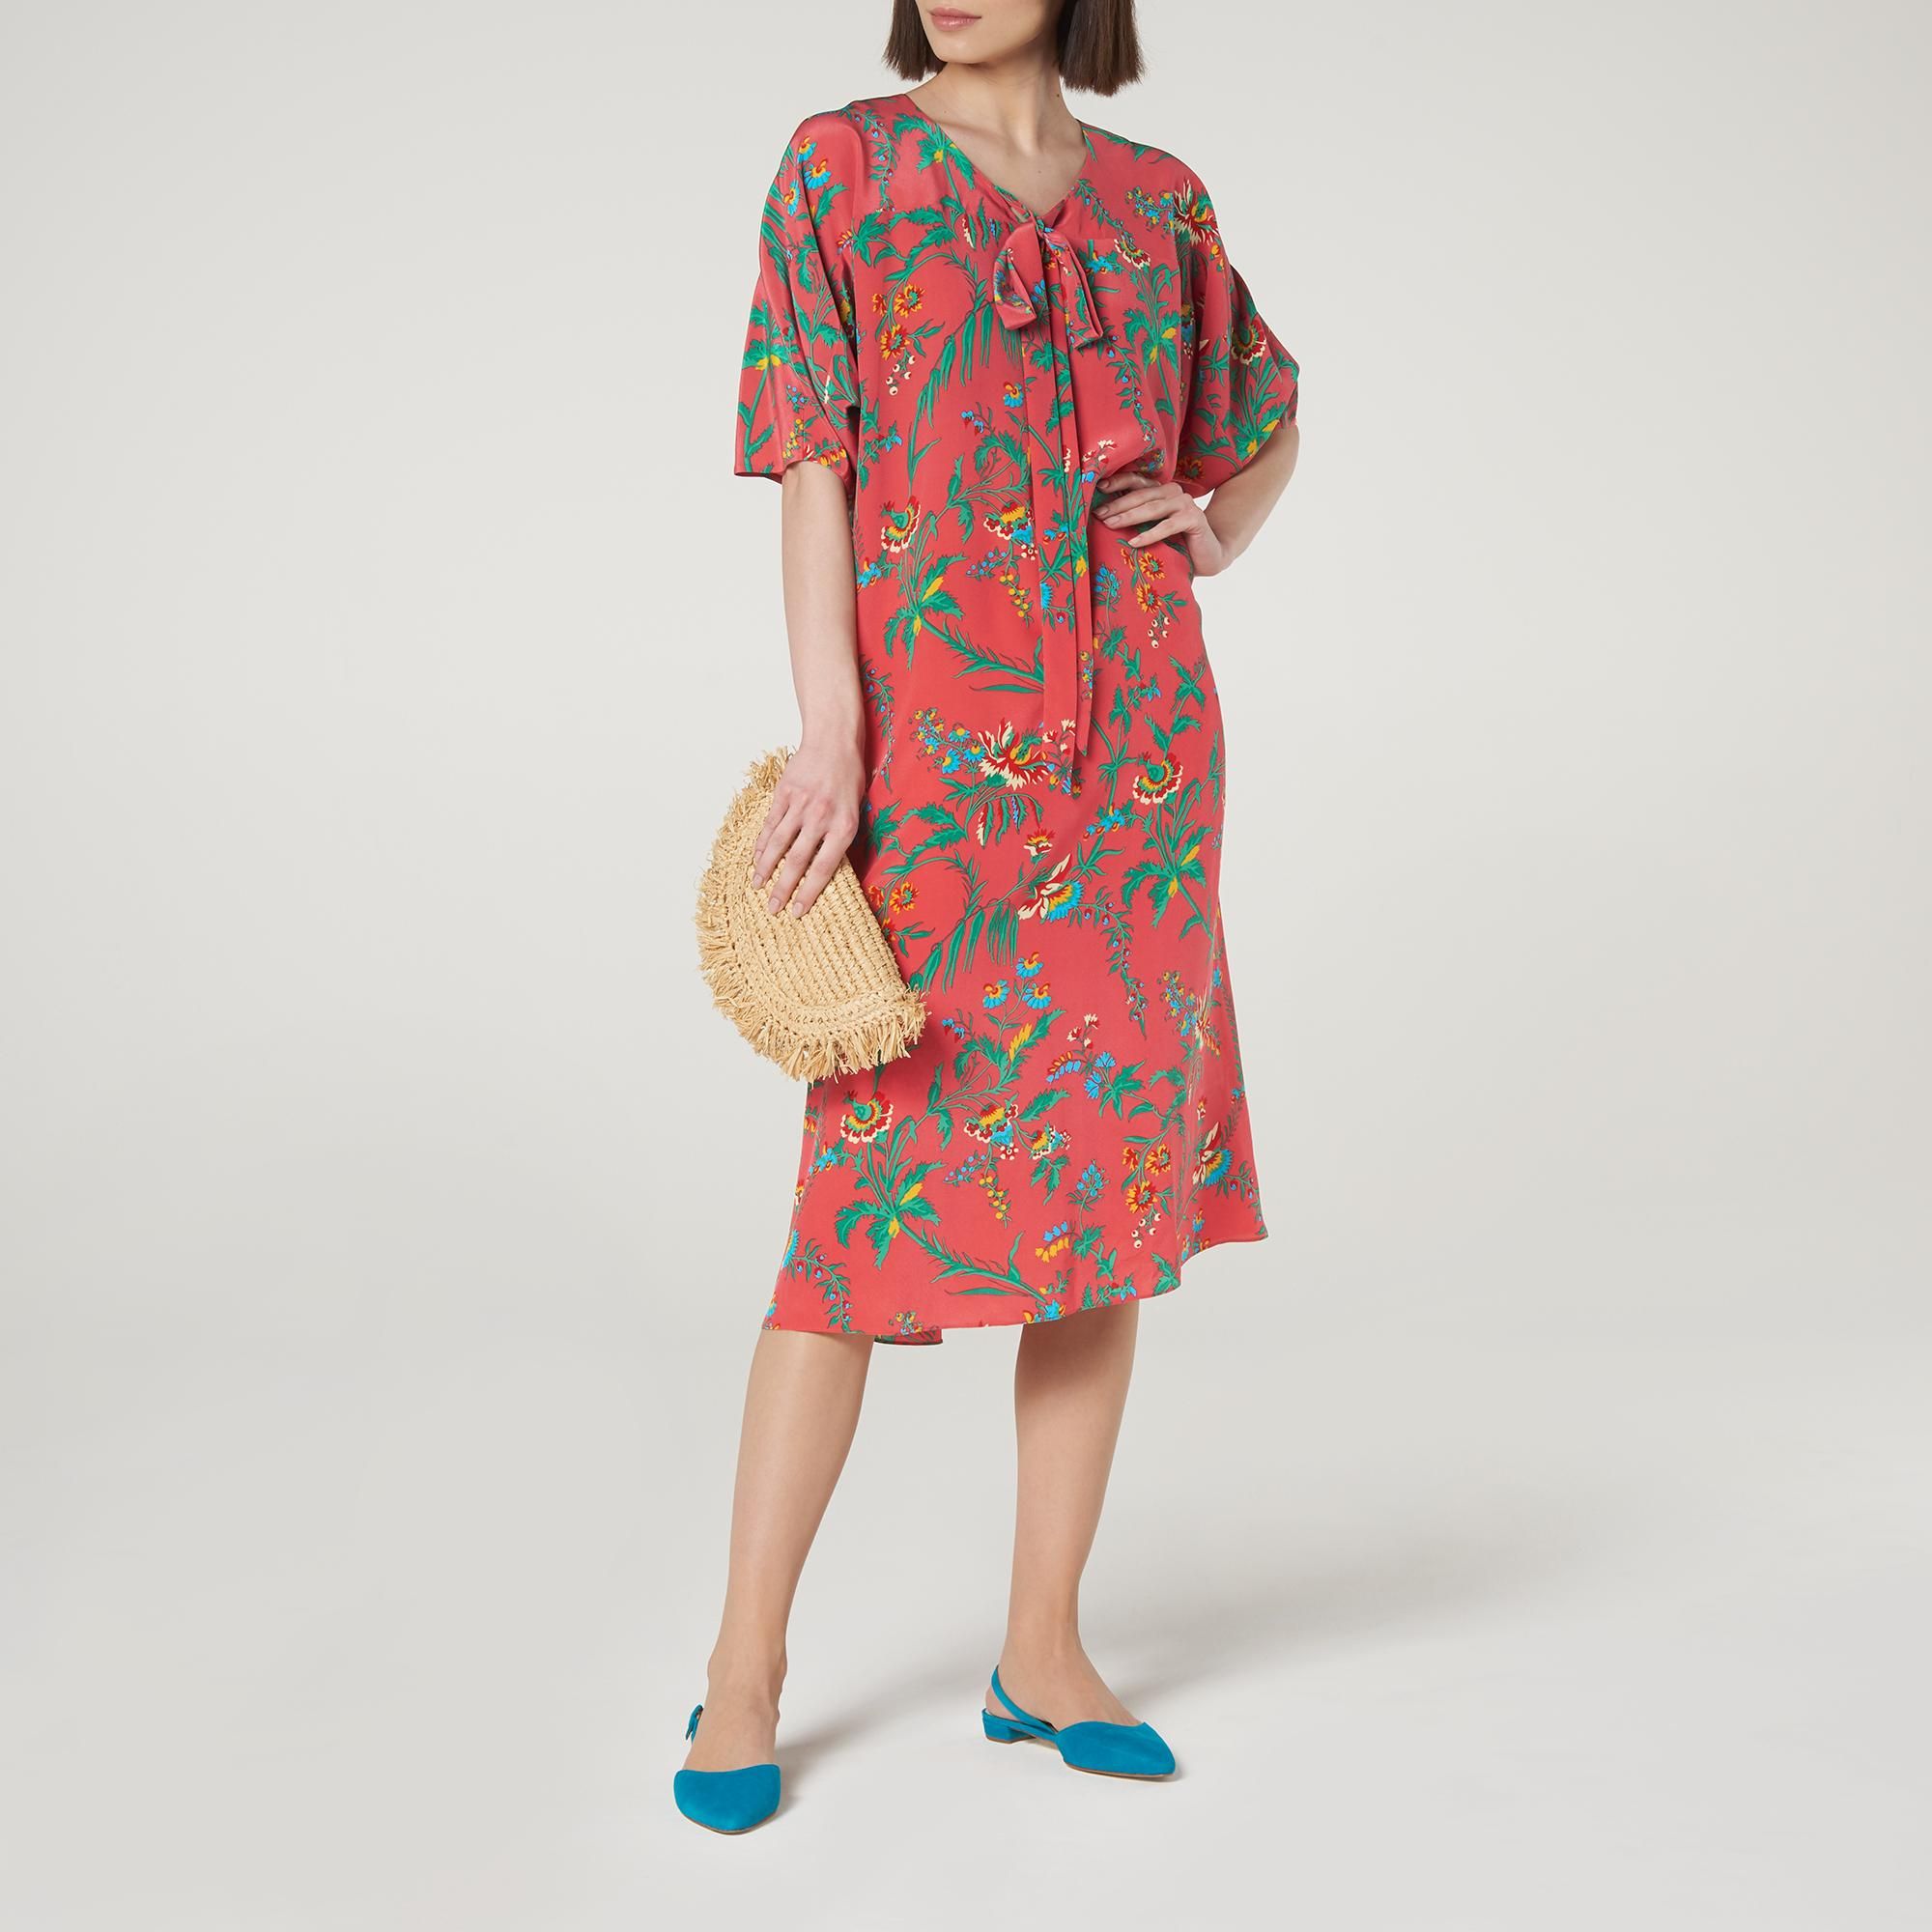 Offering colour and print to your spring wardrobe, Our Estella midi dress is perfect for seasonal sunshine. Crafted from pure silk in our bohemian wildflower print in garden pink, it has a round neck with pussy bow detail, a loose silhouette and pleated short sleeves. Wear it with simple slides and a raffia handbag for an easy, everyday look.